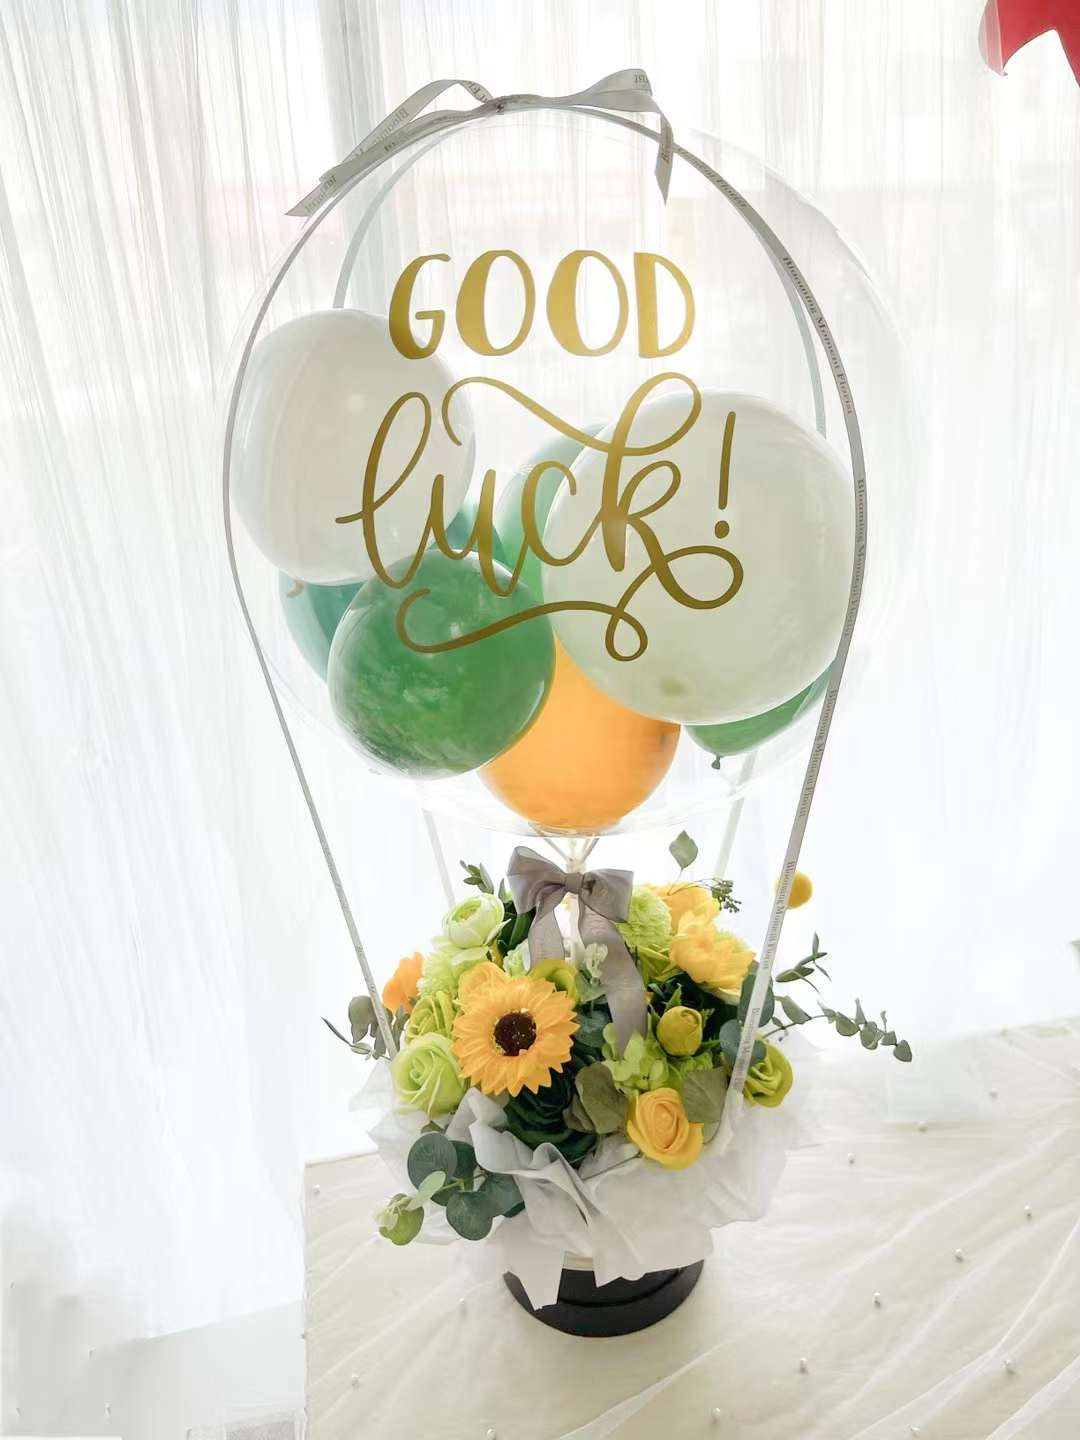 Best Wishes Bubble hot air balloon Soap flower basket